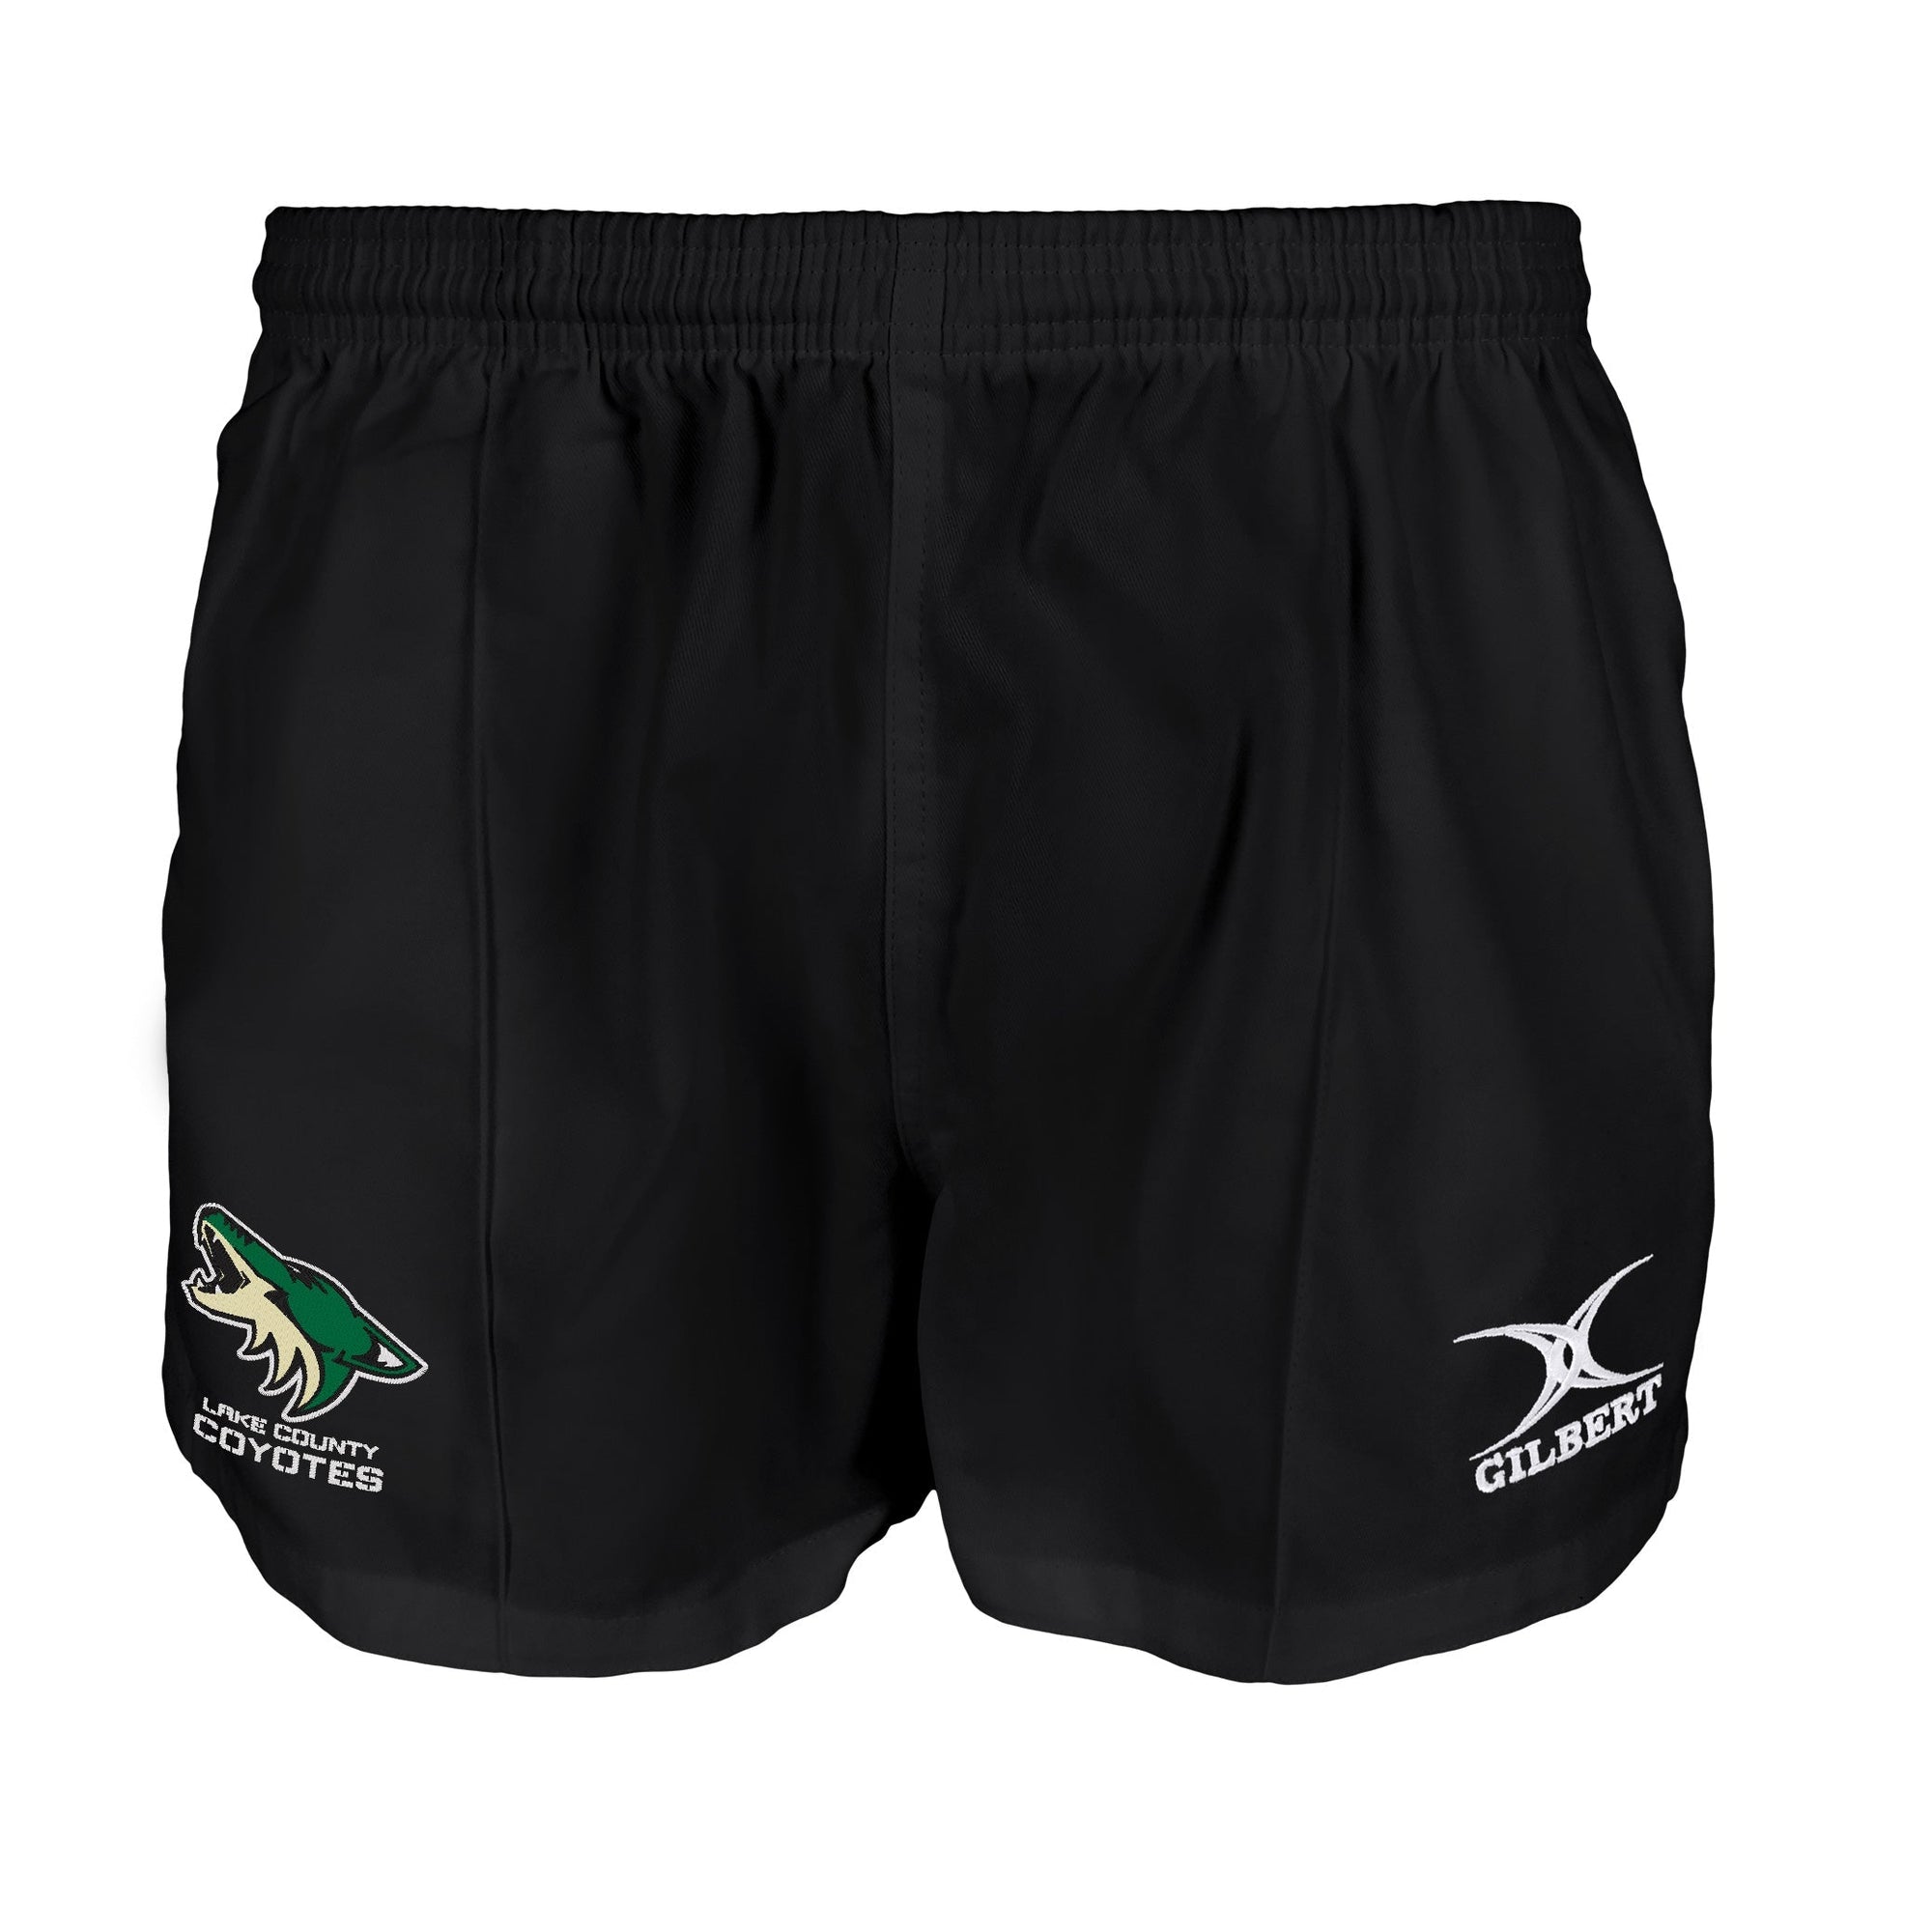 Rugby Imports Lake County Kiwi Pro Rugby Shorts